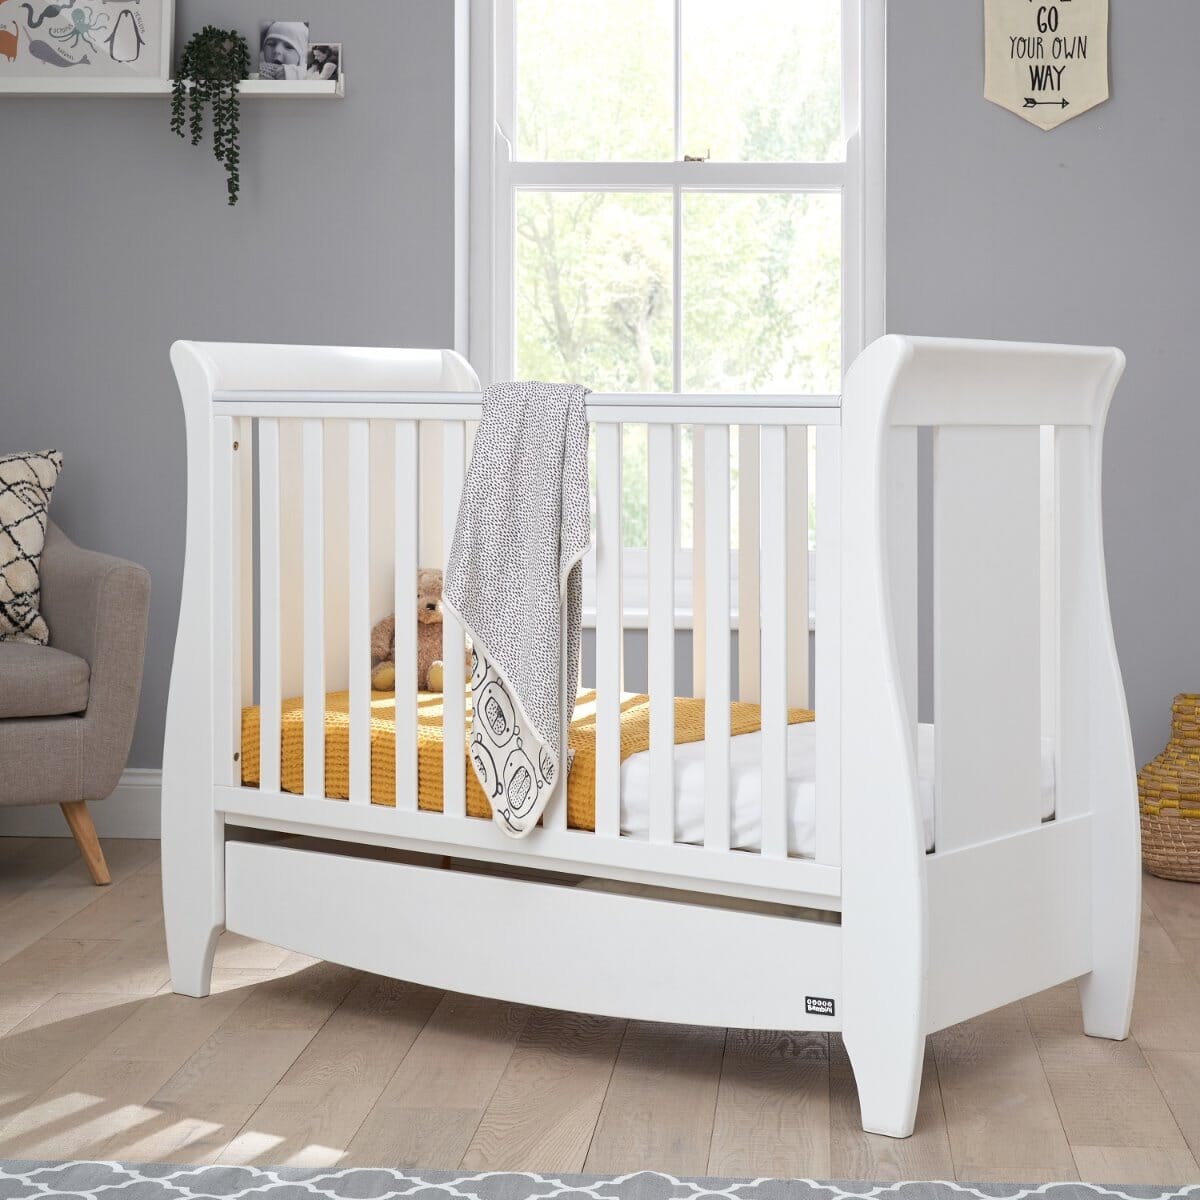 Tutti Bambini Tutti Bambini Sleigh cot bed with mattress and under bed drawer 